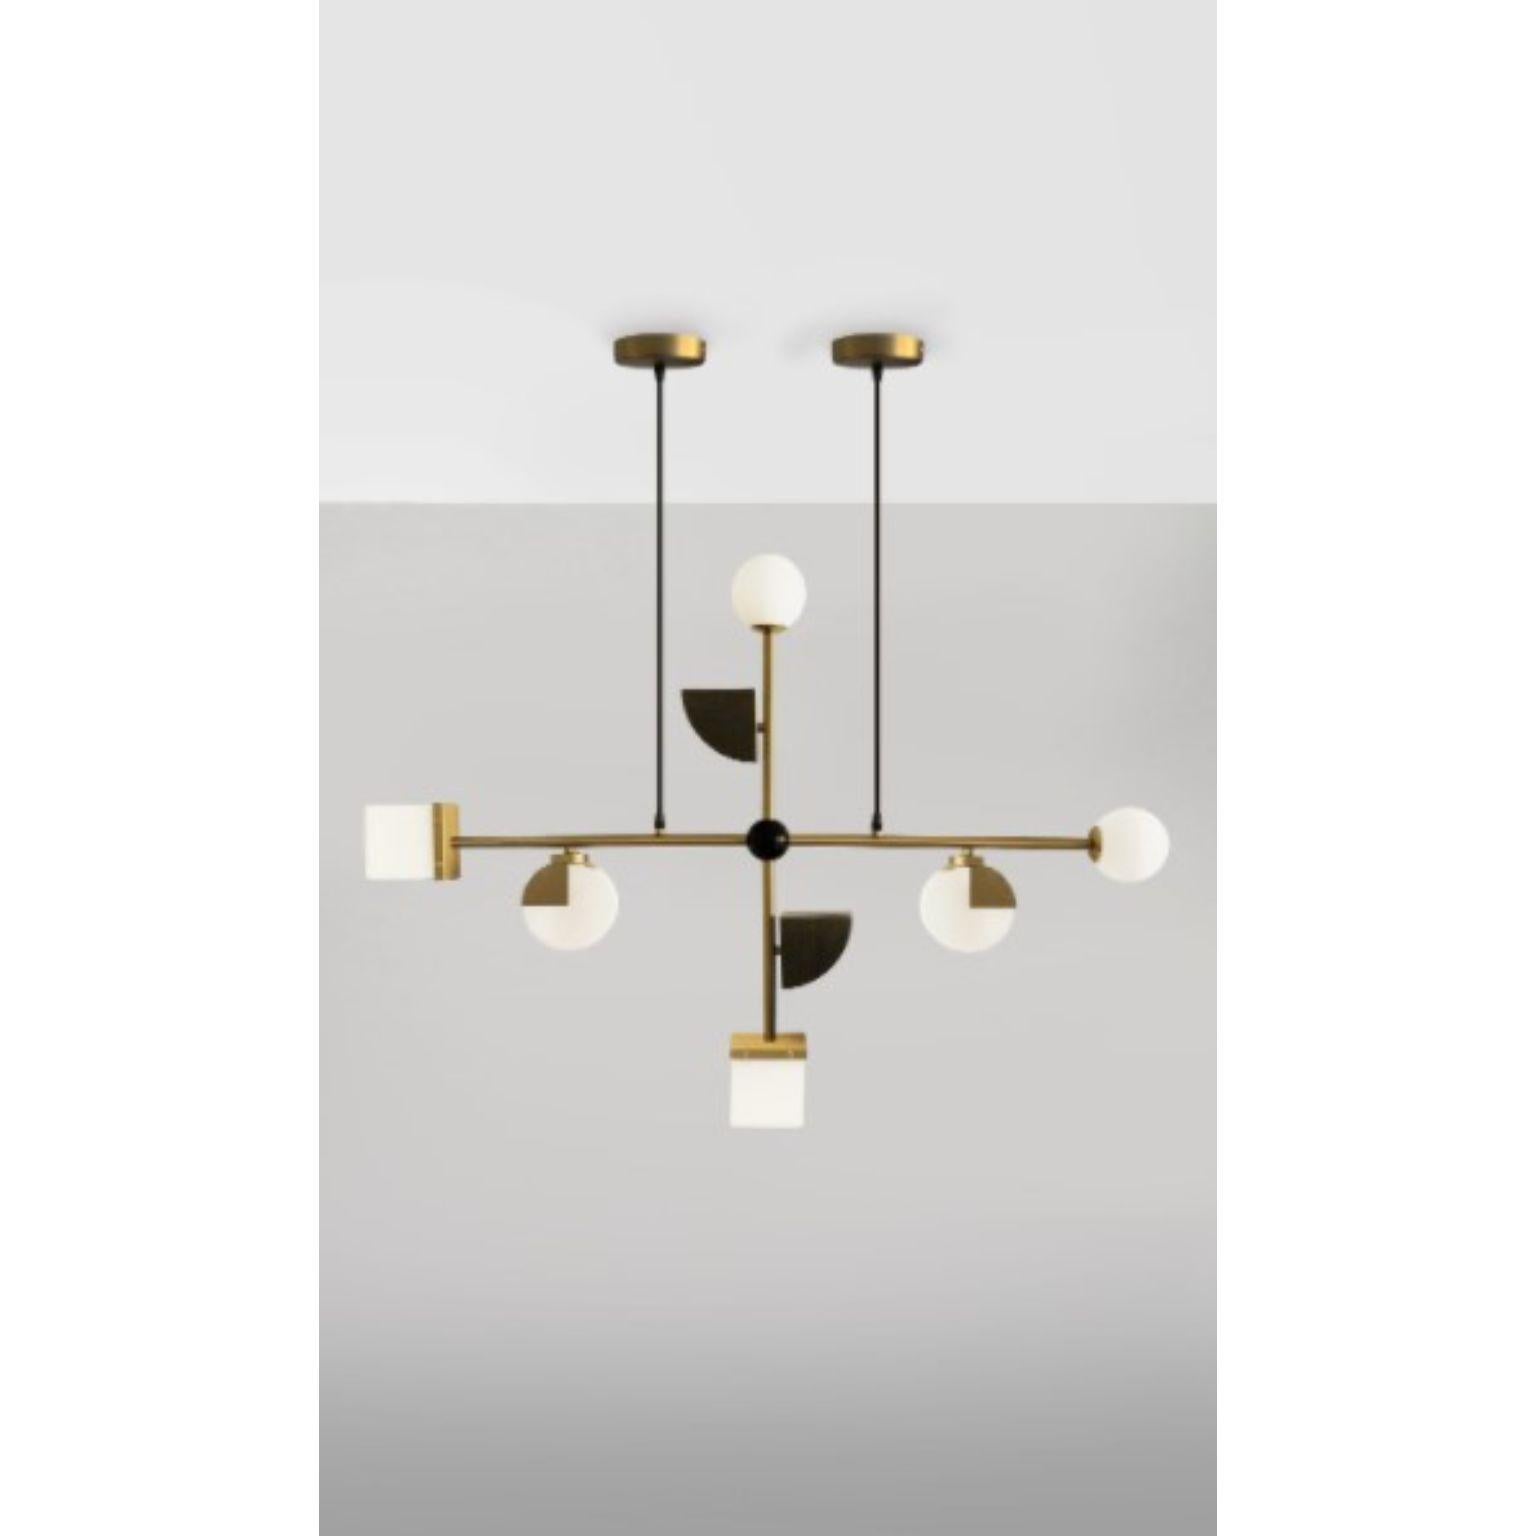 Signature pendant light by Square in Circle
Dimensions: D 108 x W 10 x H 76 cm
Materials: Brushed brass/ white frosted glass/ brushed grey metal/ black fabric flex
Other finishes available.

This pendant light is designed taking inspiration